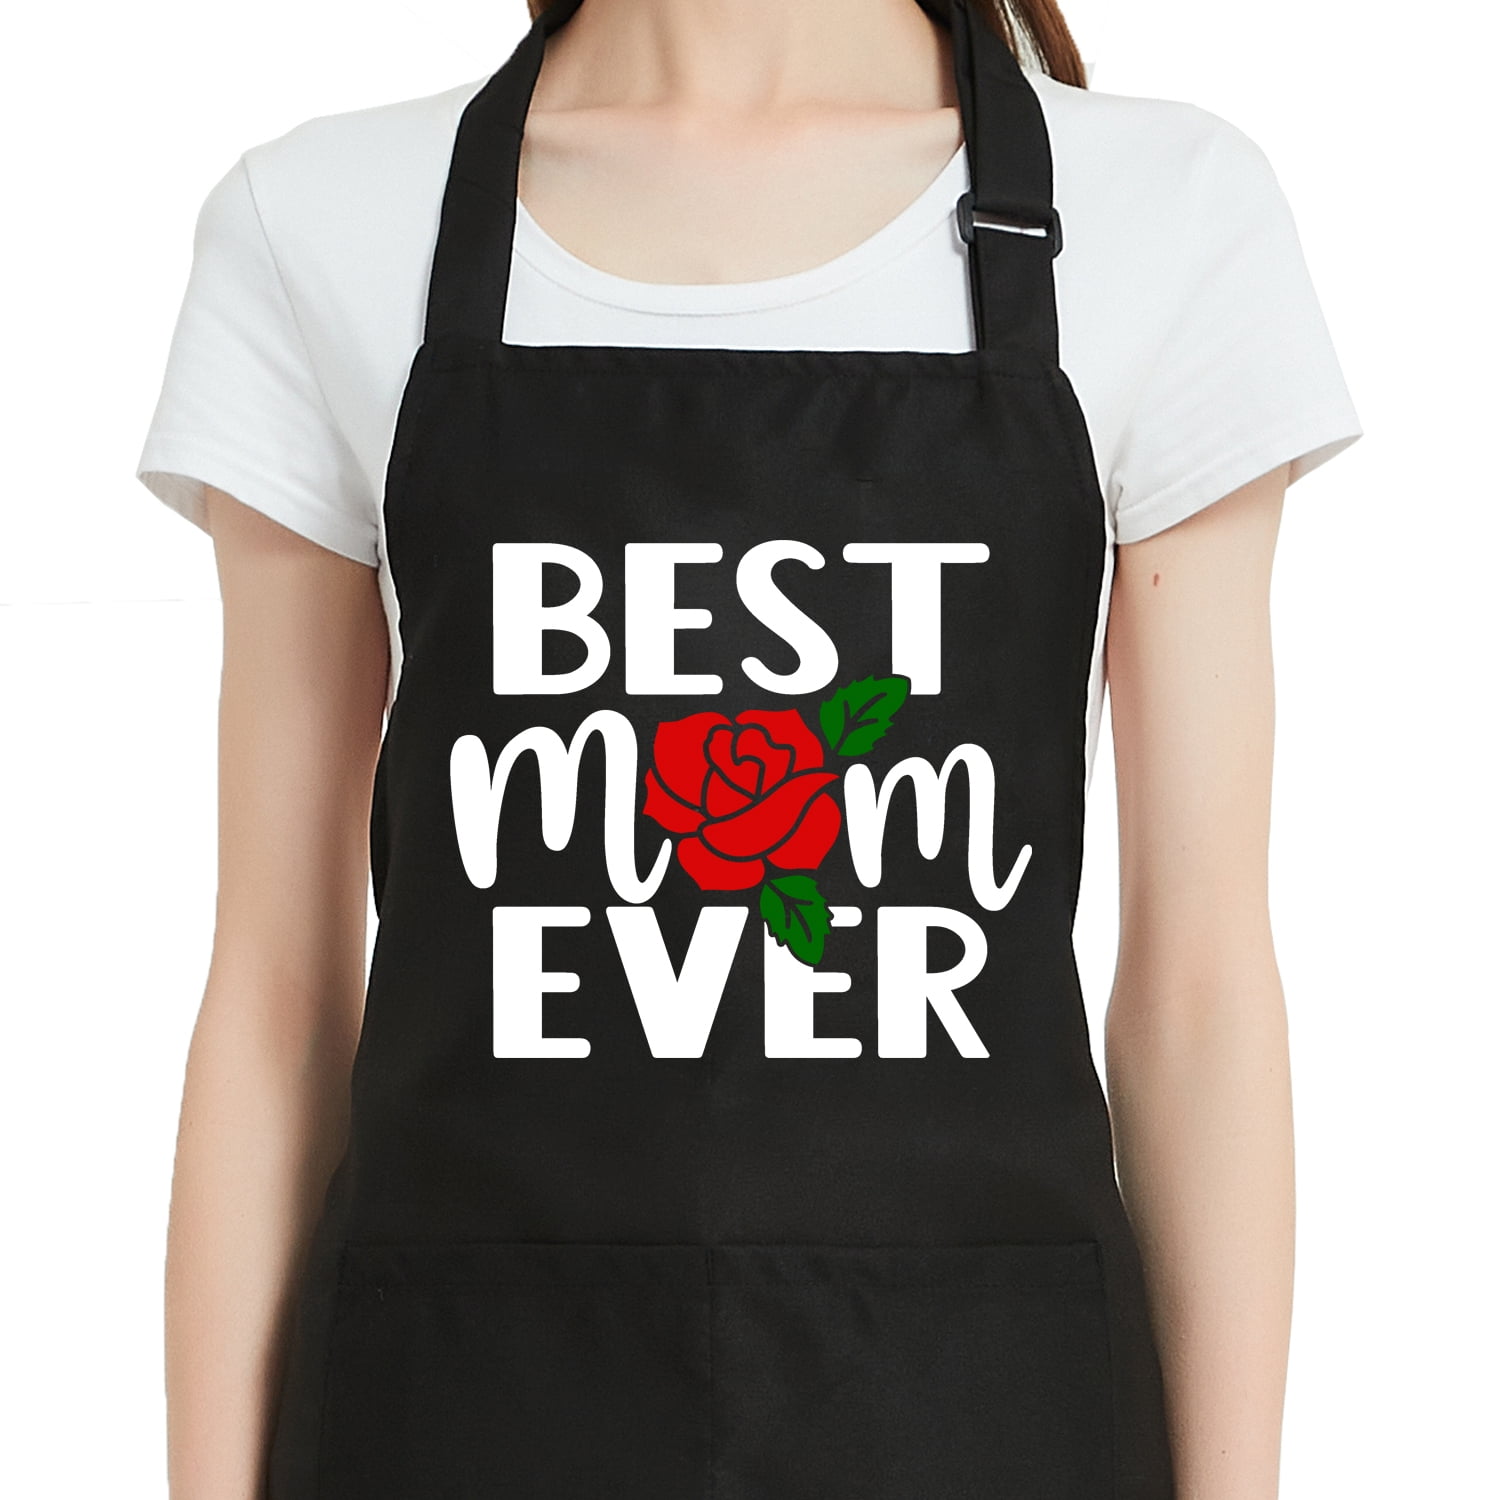 Retirement Gifts for Men, Funny Cooking Aprons for Women Retired BBQ Grill  Grilling Apron for Dad, Mom, Coworkers, Friends 